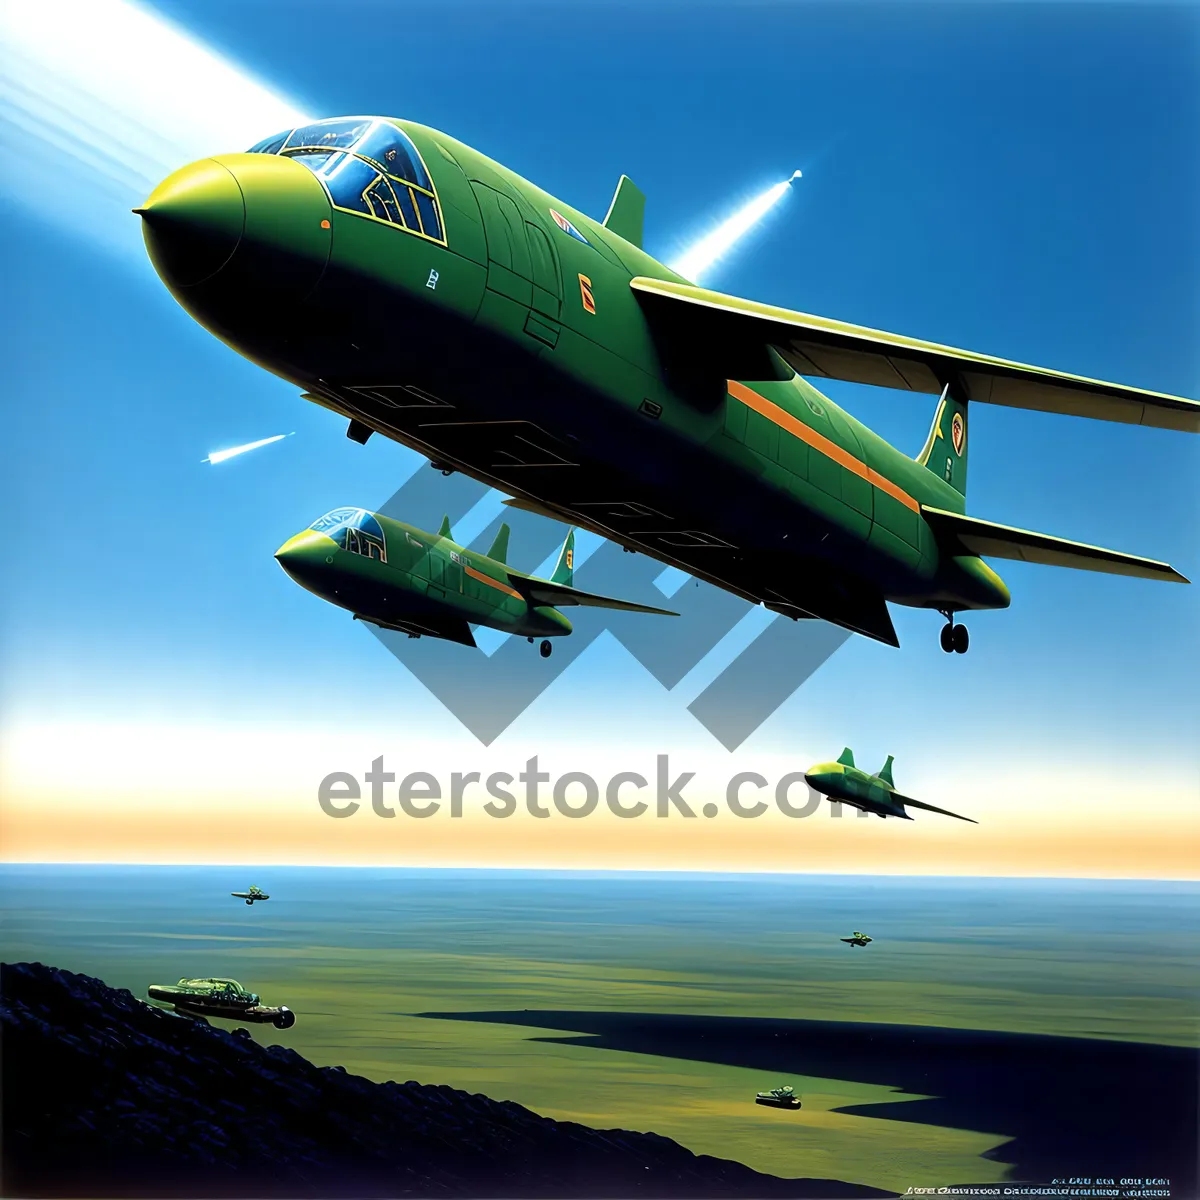 Picture of Jet Aircraft Soaring Through the Sky